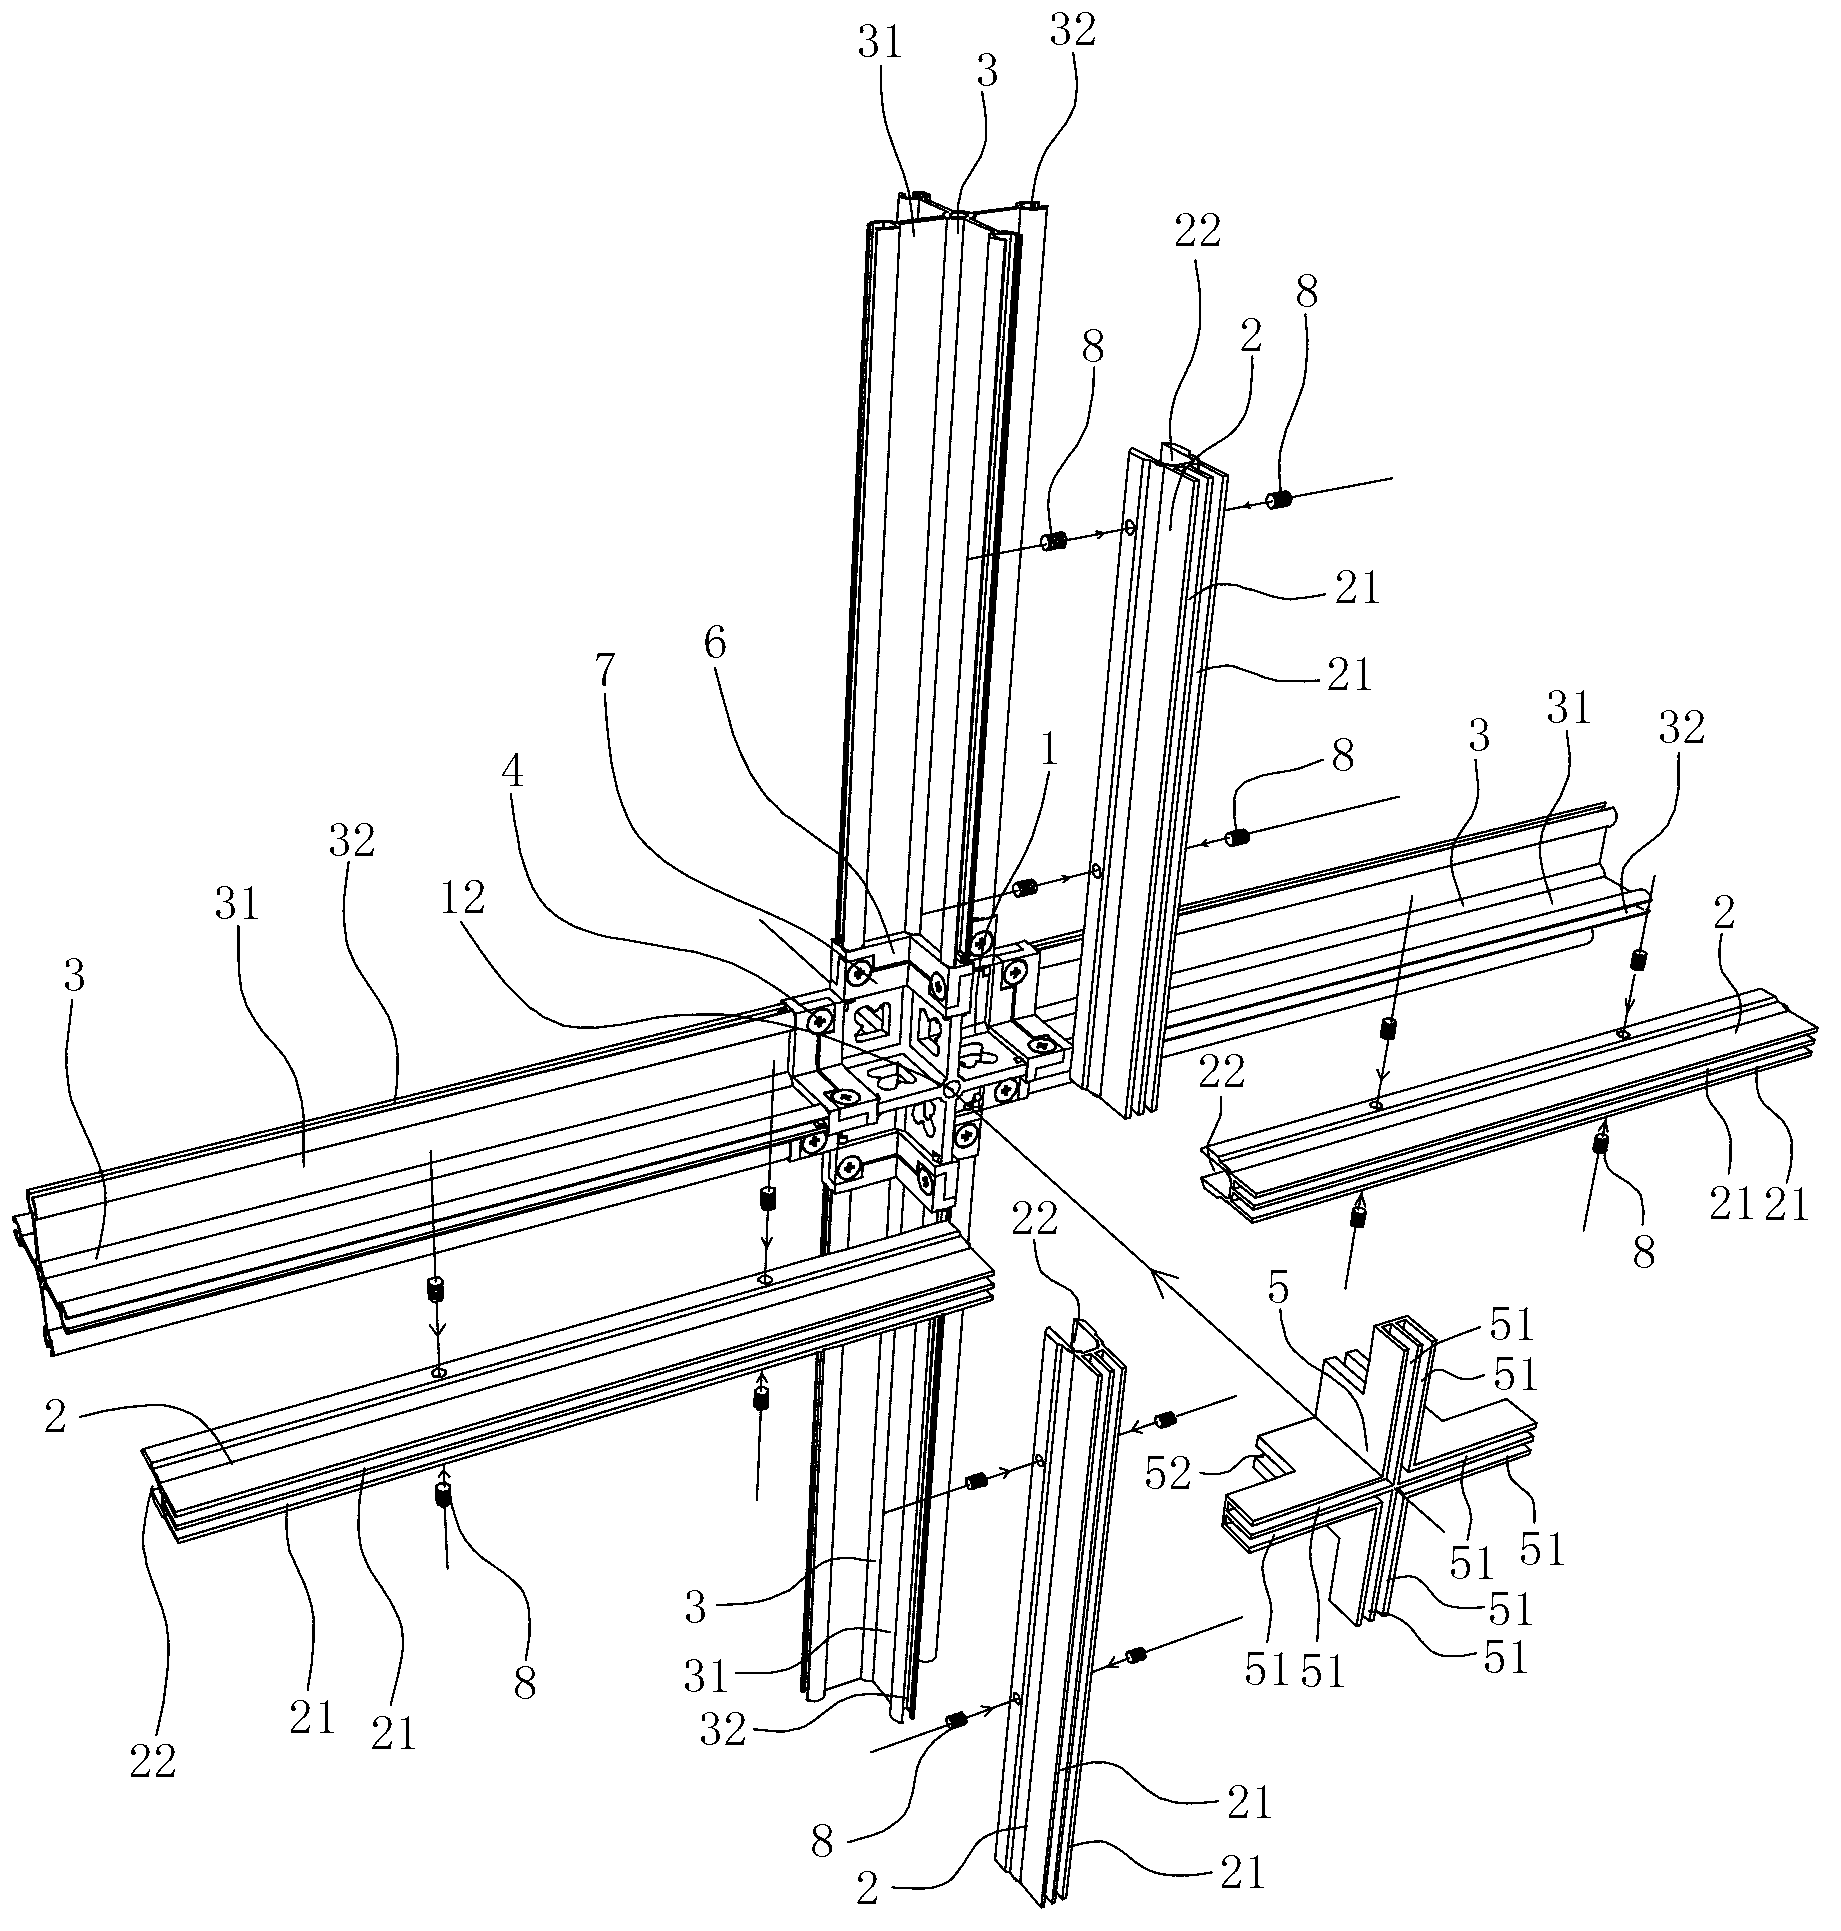 Connection assembly of combined type frame